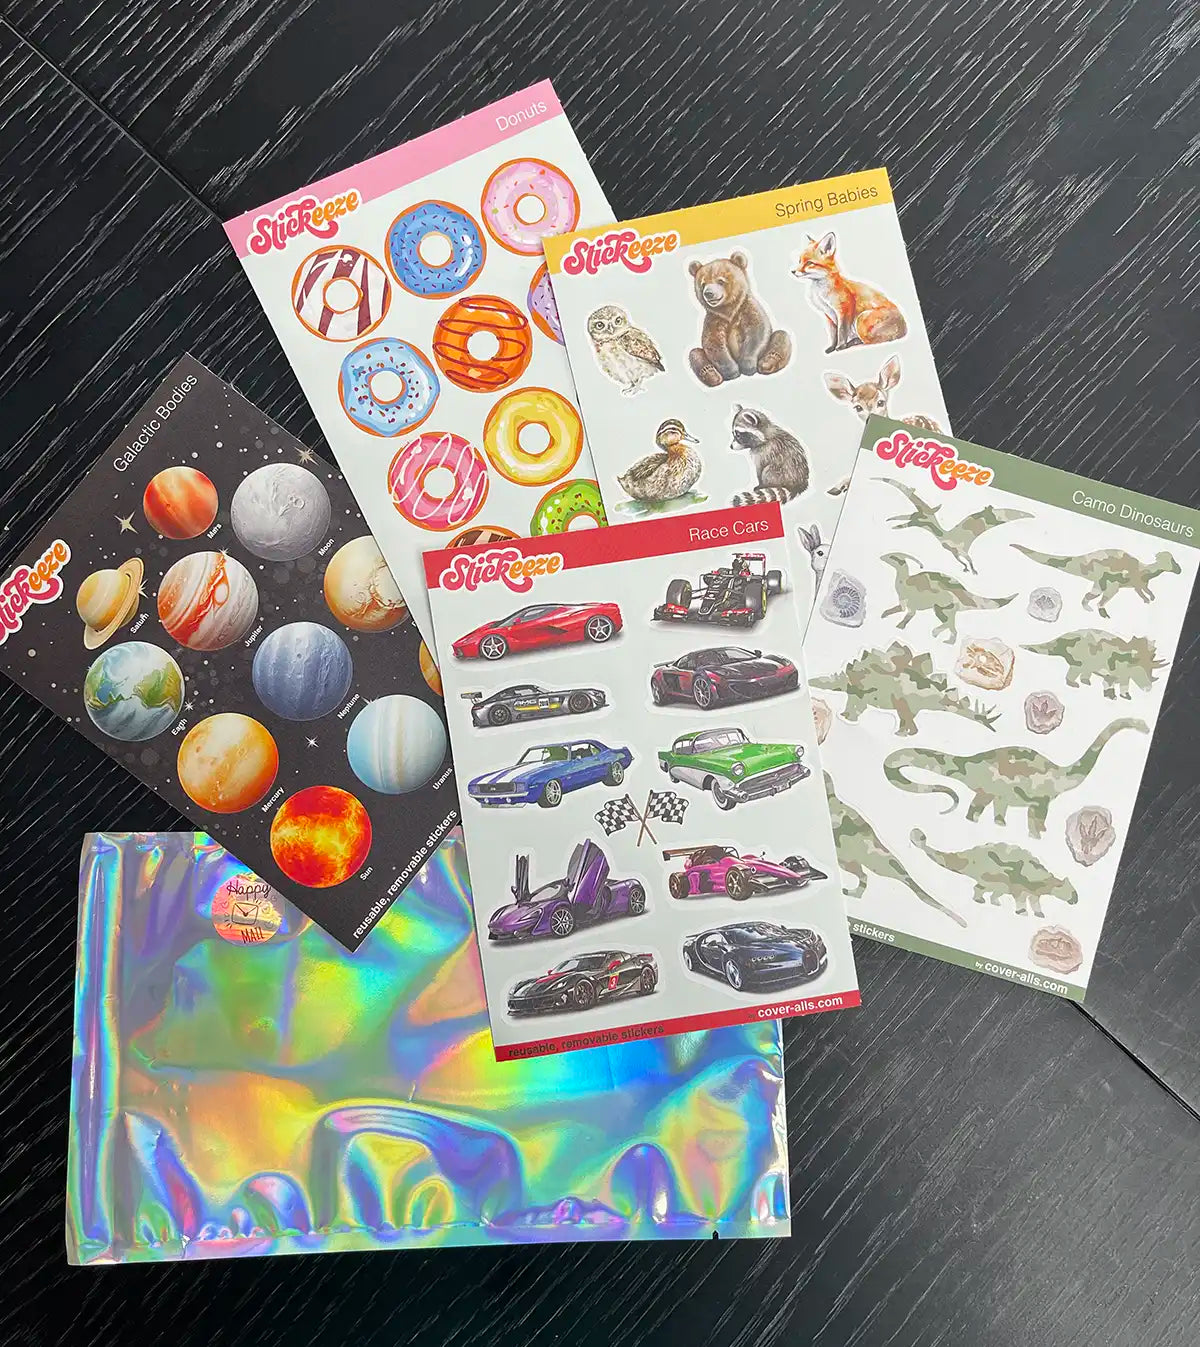 Five sheets of assorted reusable stickers from Stickeeze's Kid's Sticker Club on a dark wooden surface, including designs of planets, doughnuts, spring animals, race cars, and dinosaurs, on two iridescent envelopes.